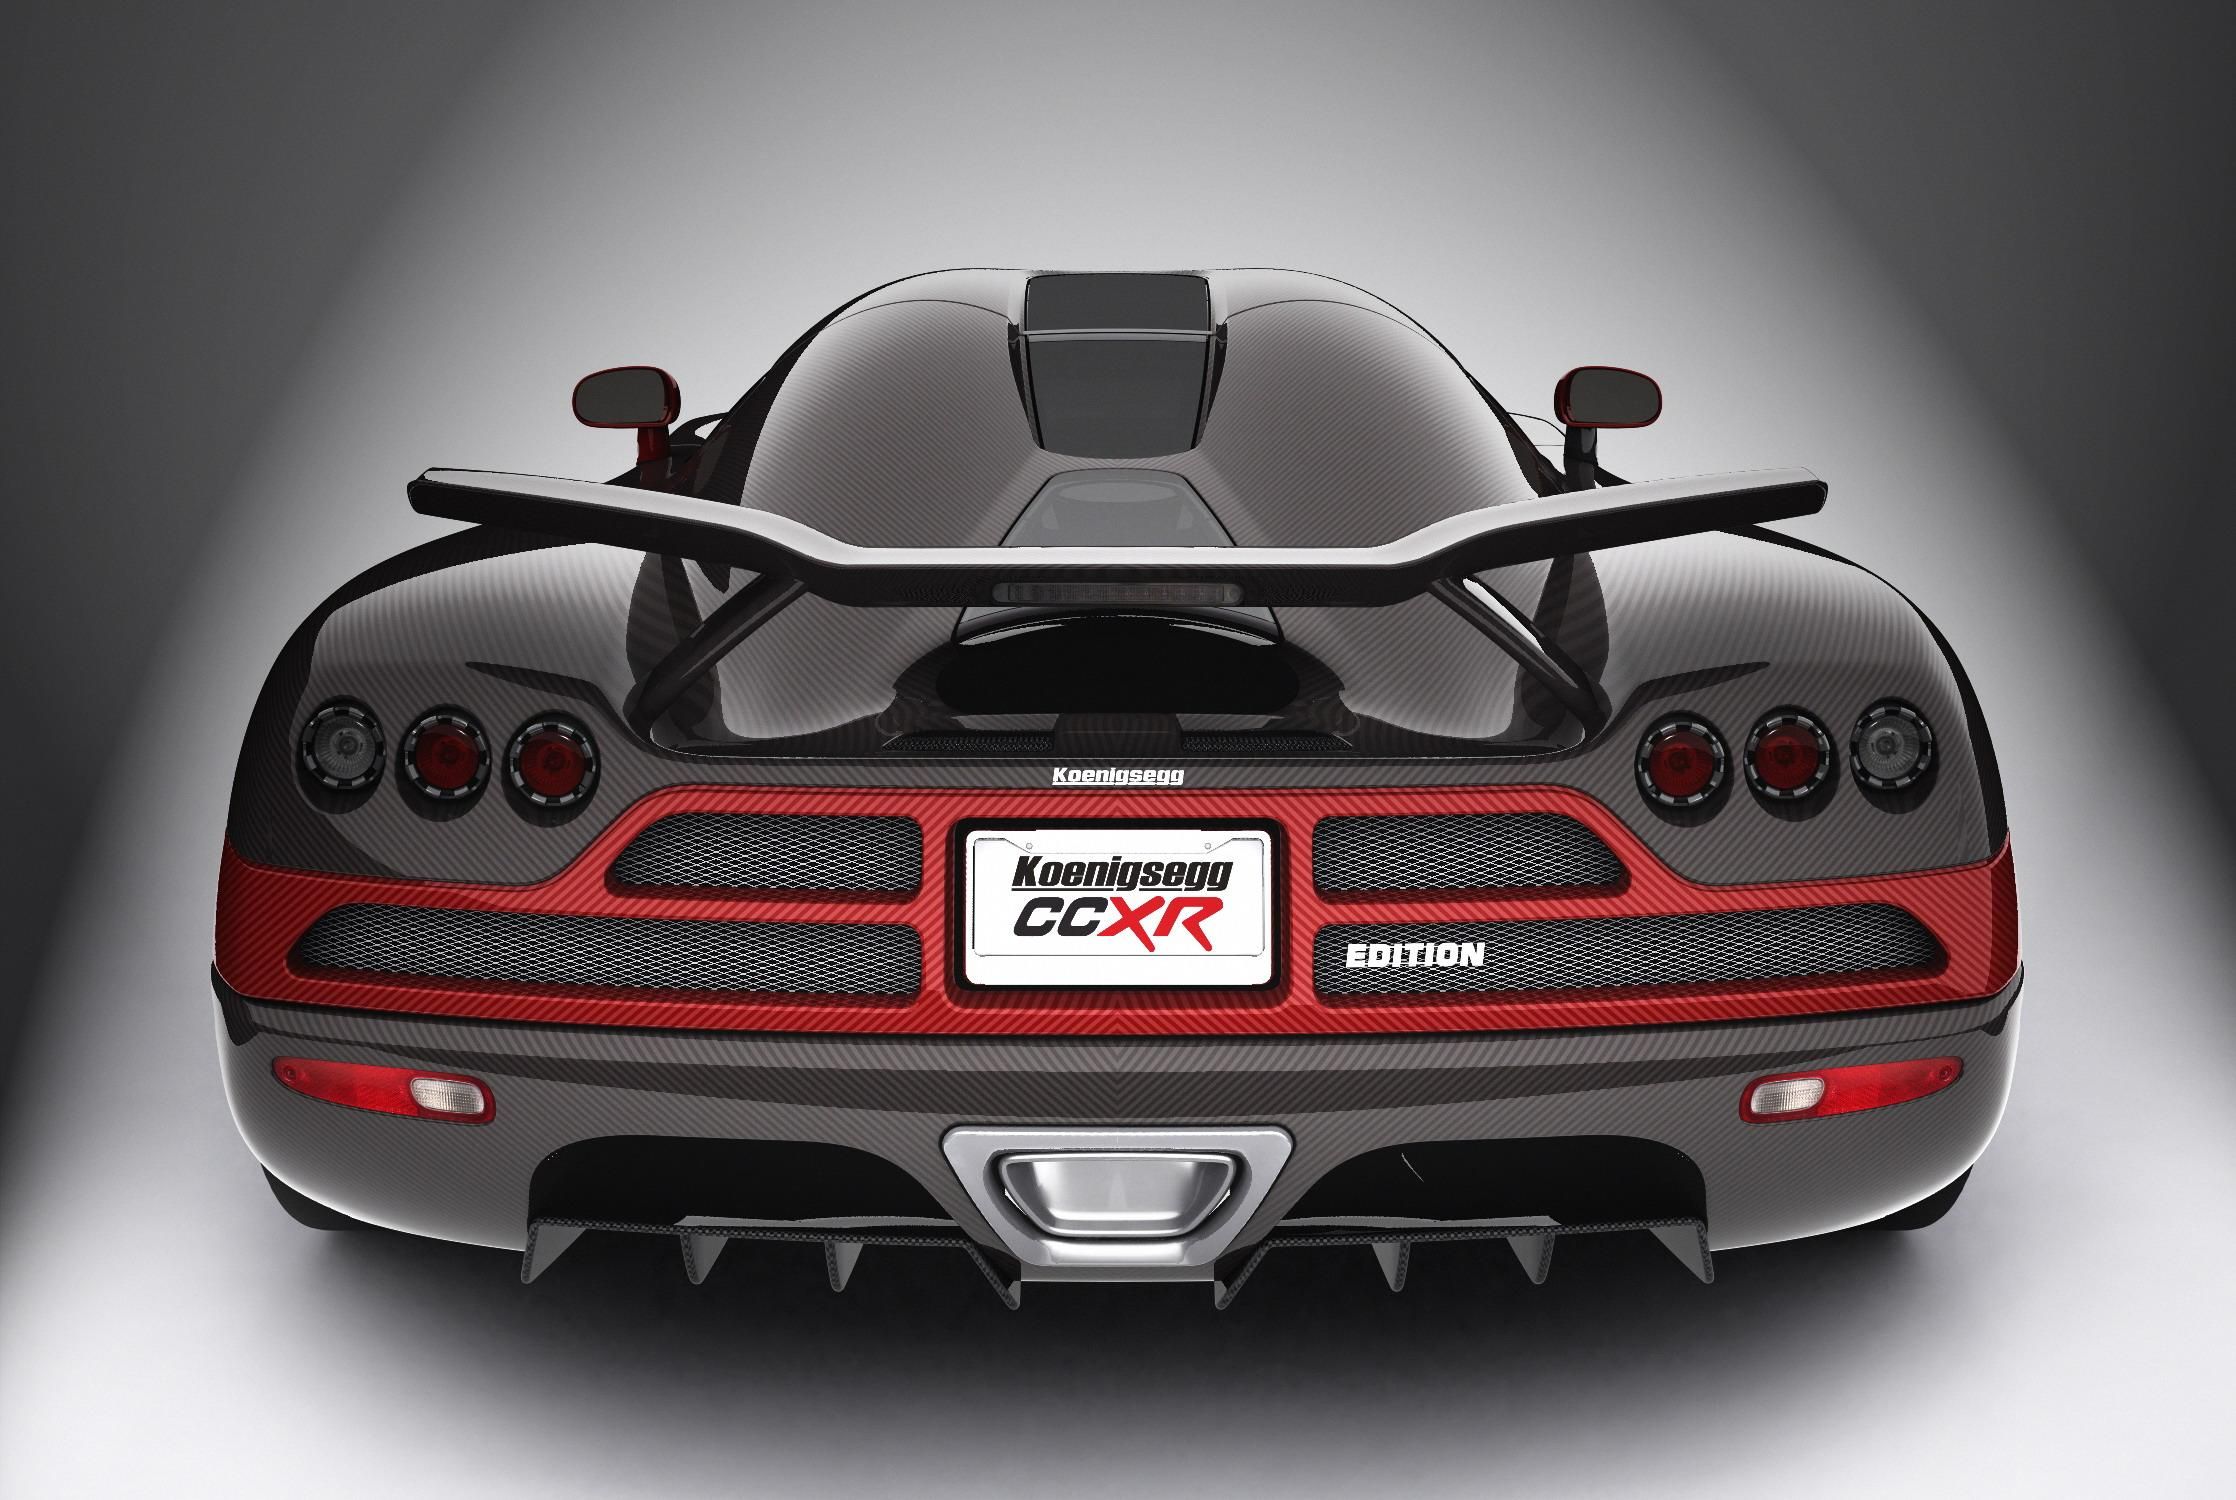 2007 Koenigsegg CCX and CCXR Limited Editions